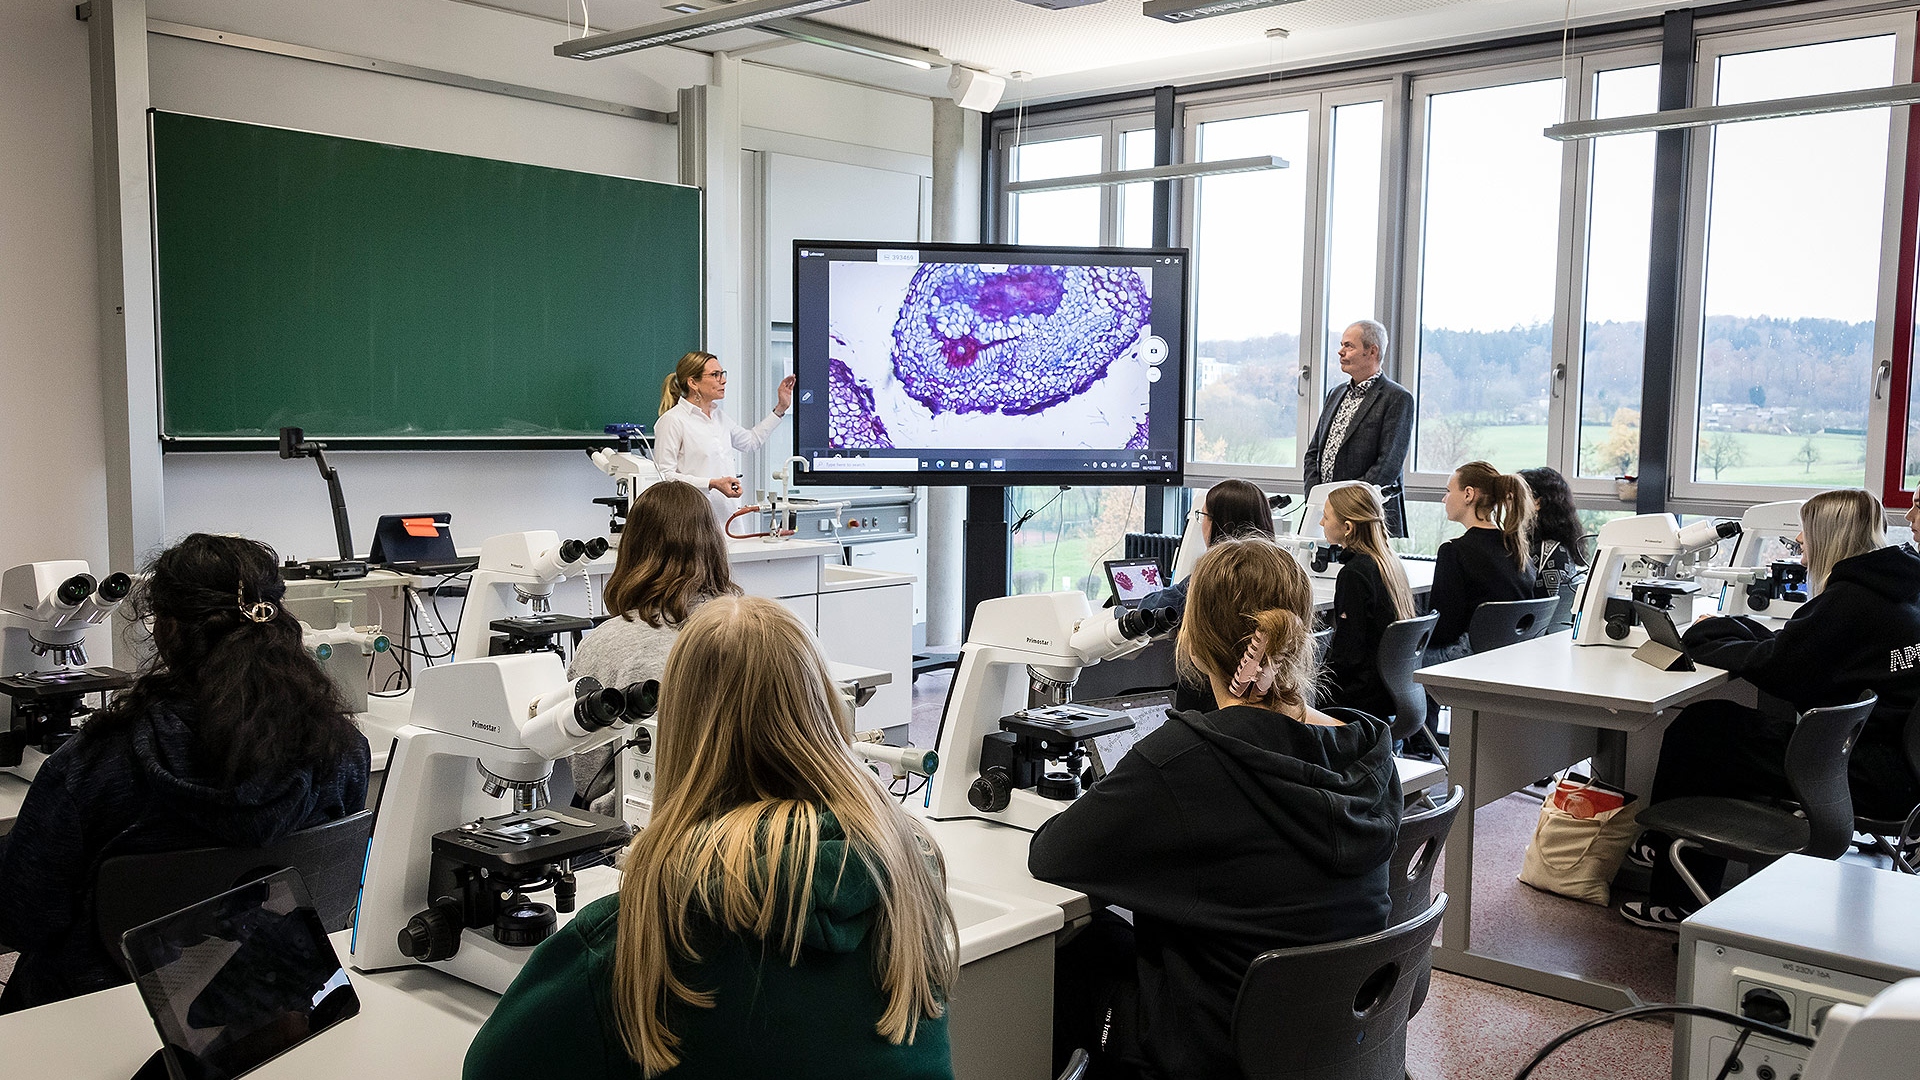 Aalen: new microscopes for modern teaching